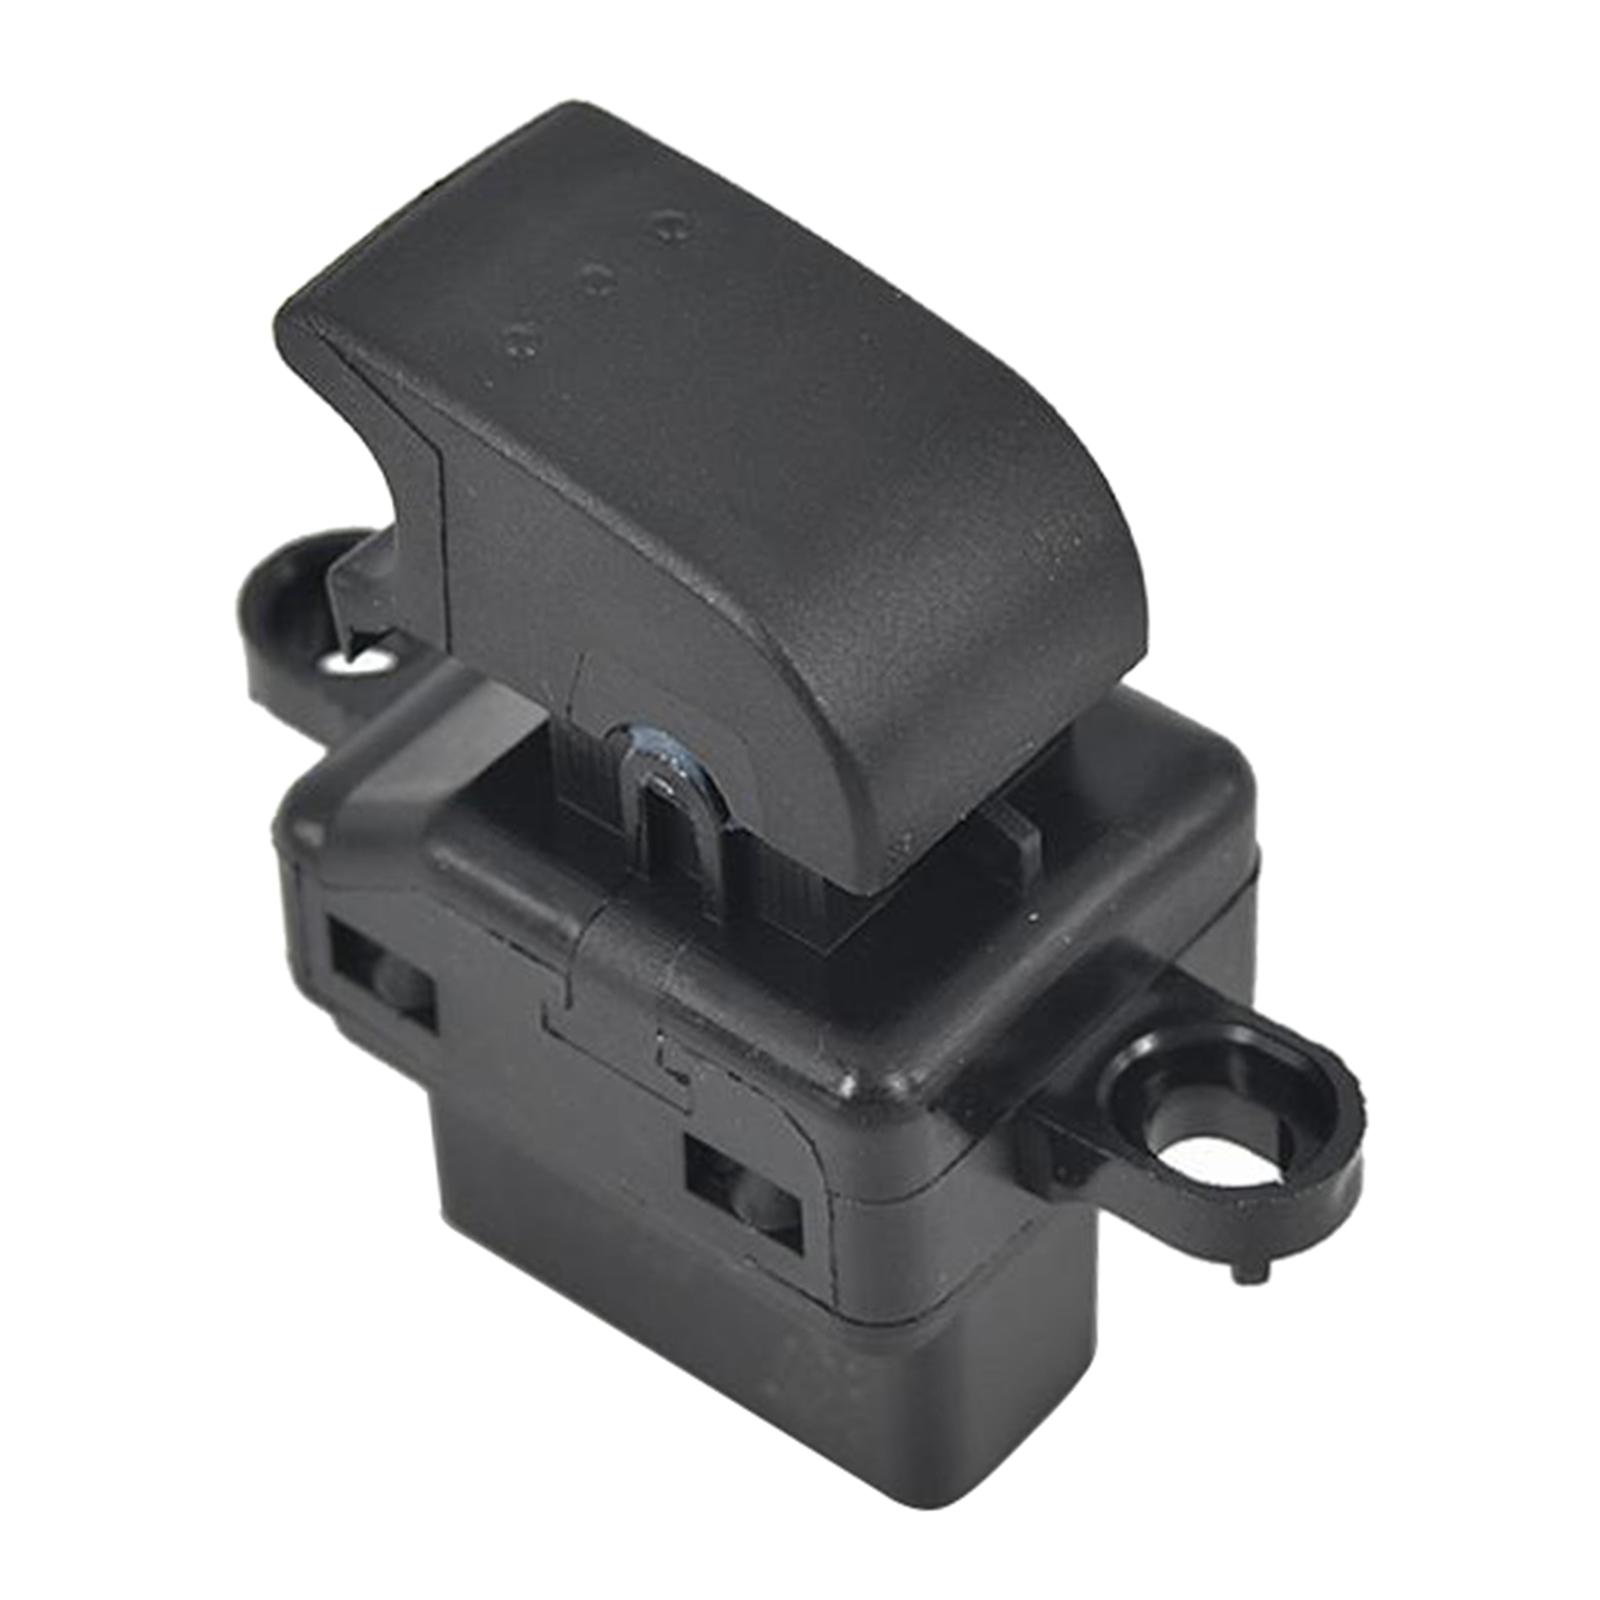 B32H-66-370 Window Control Switch for Mazda 3 2004-2009 Series Vehicle